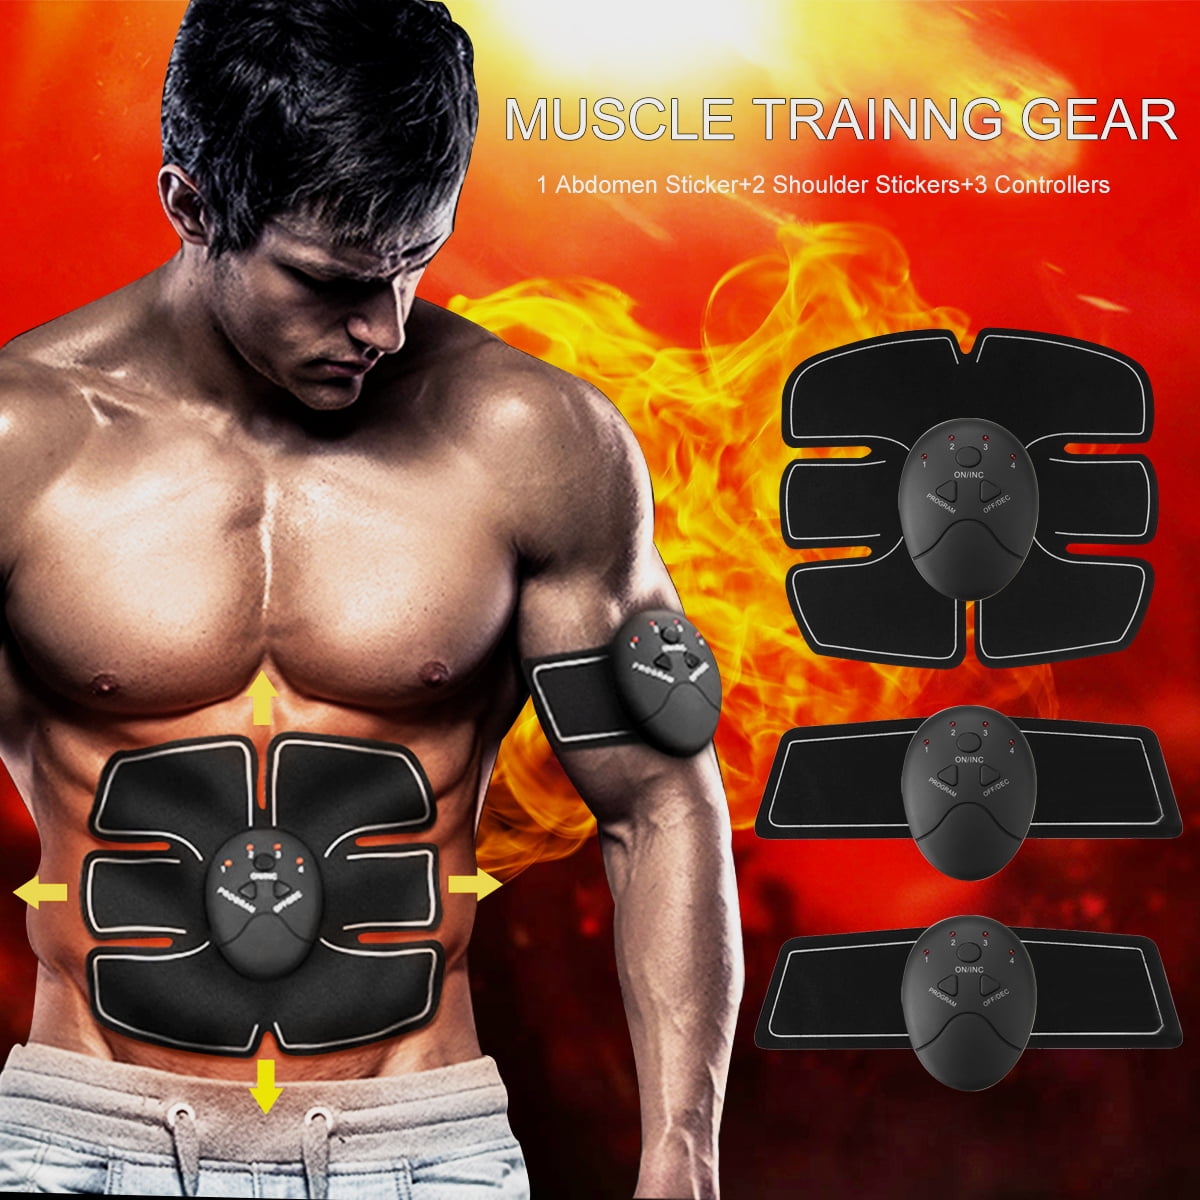 Arms Muscle Simulator Exercise Abdominal Trainer Set ABS Training Tool Home Gym 